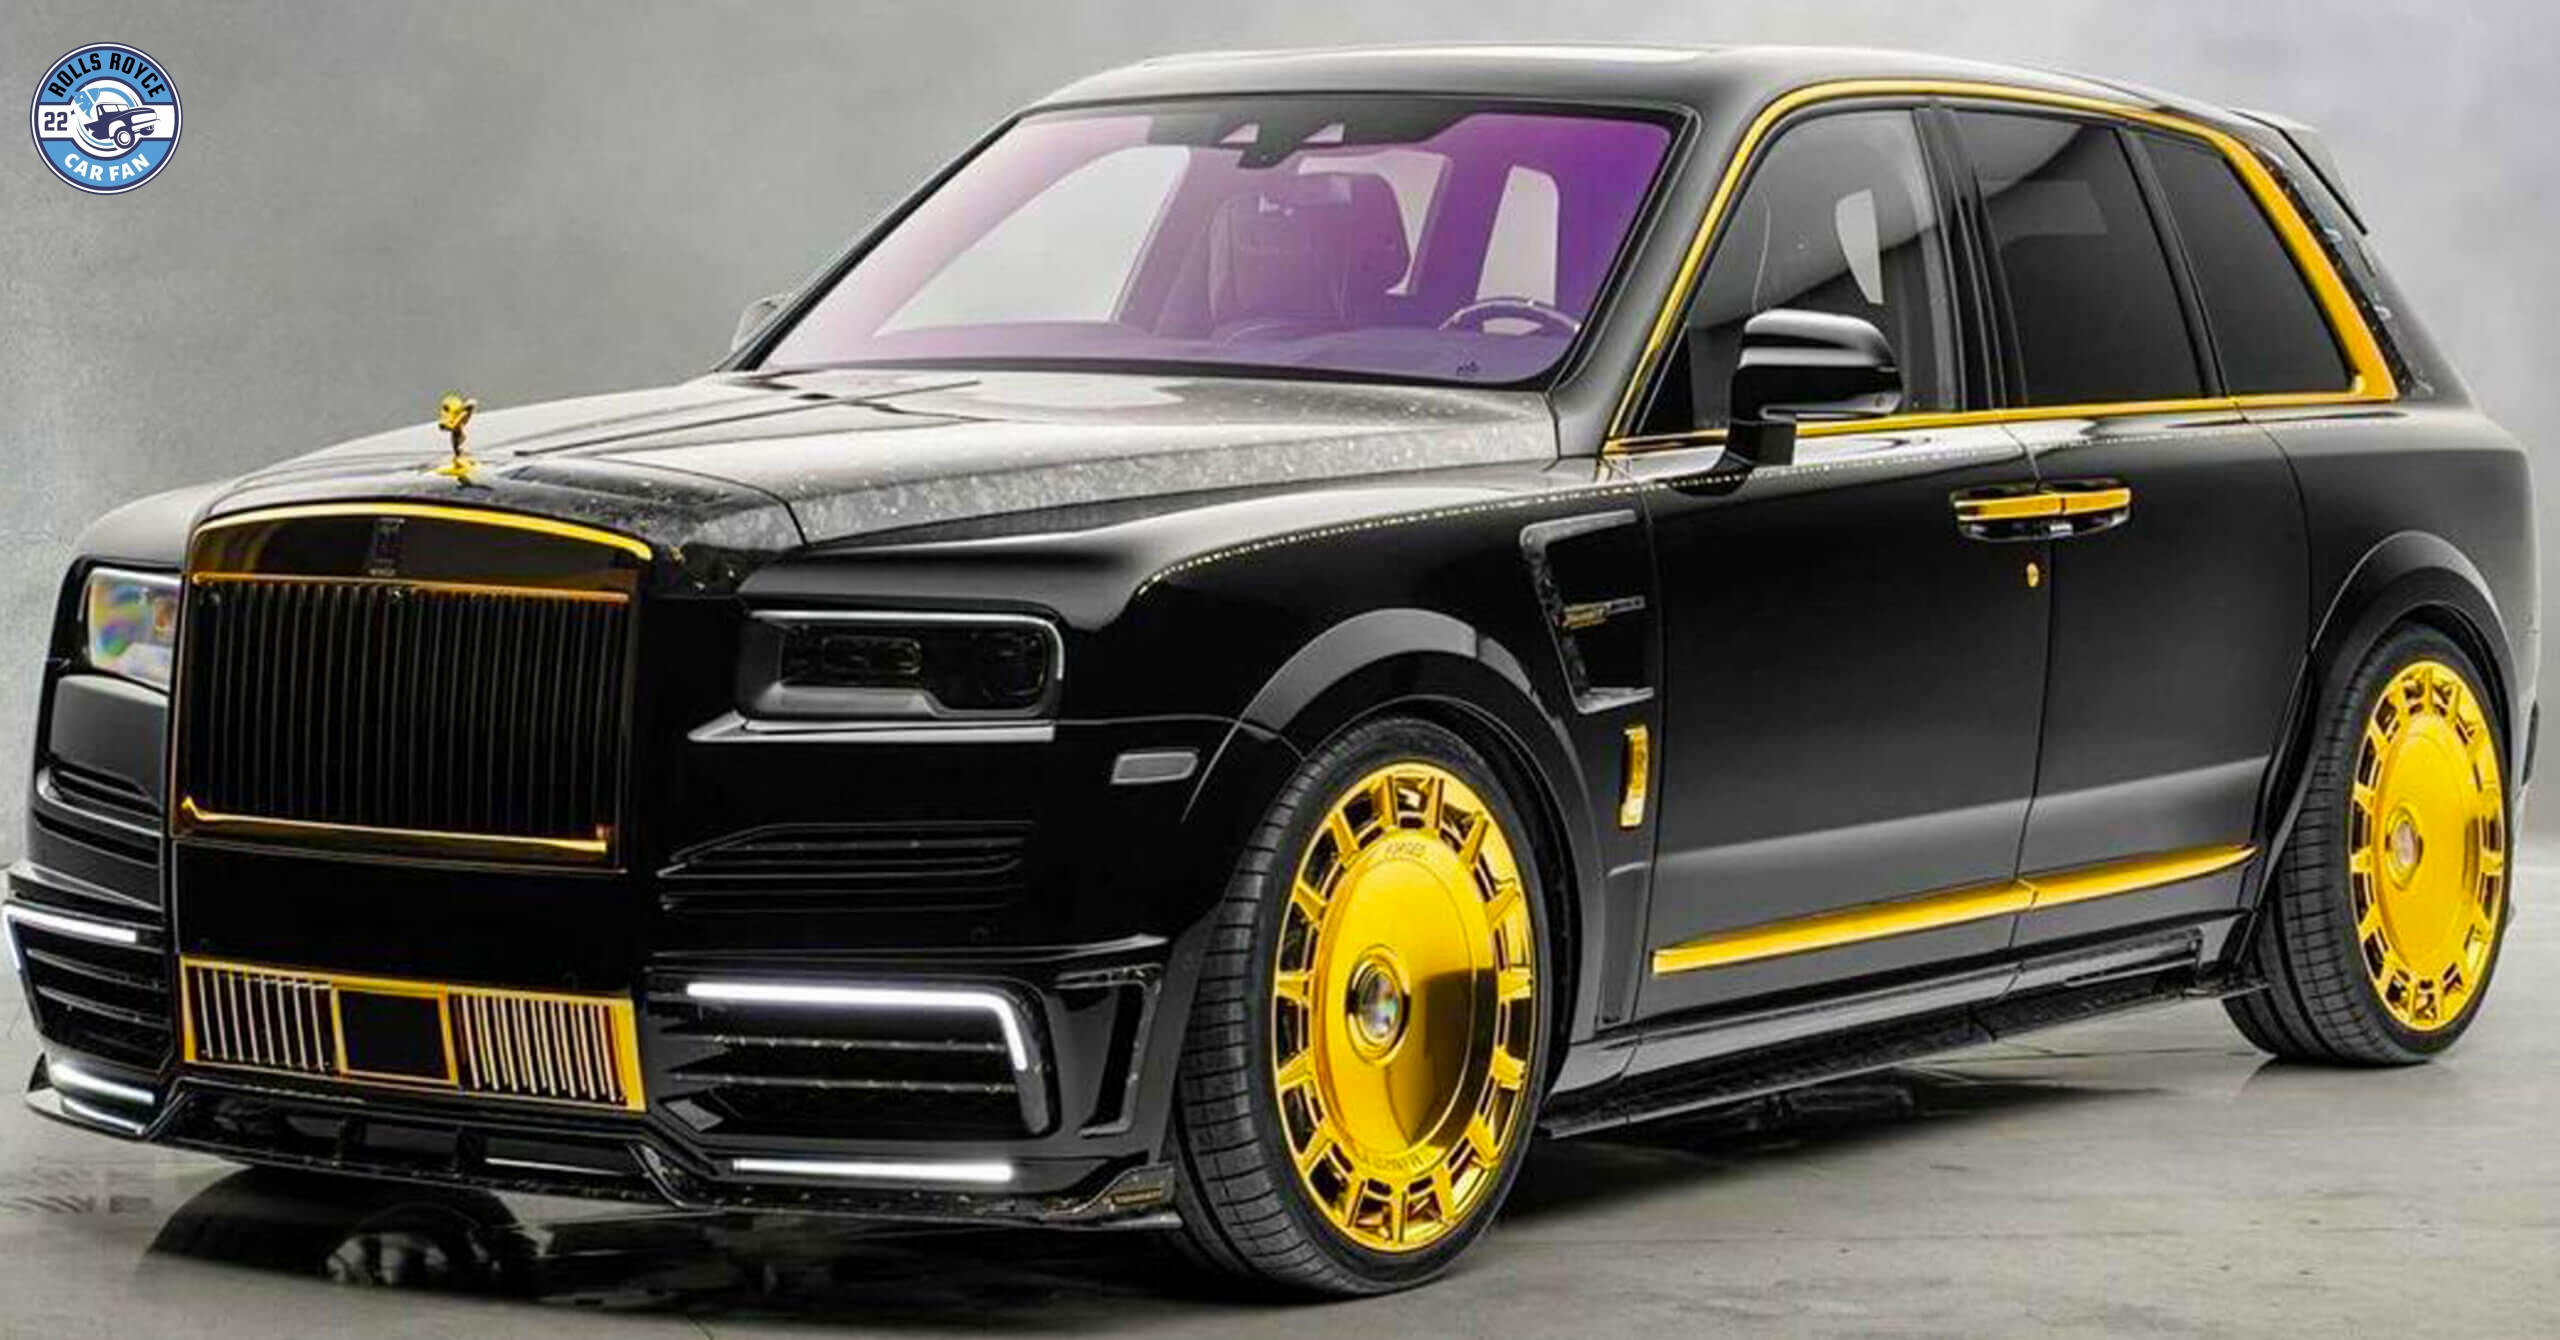 Mansory Linea D’Oro Based on Rolls-Royce Cullinan: The Epitome of Luxurious Excess